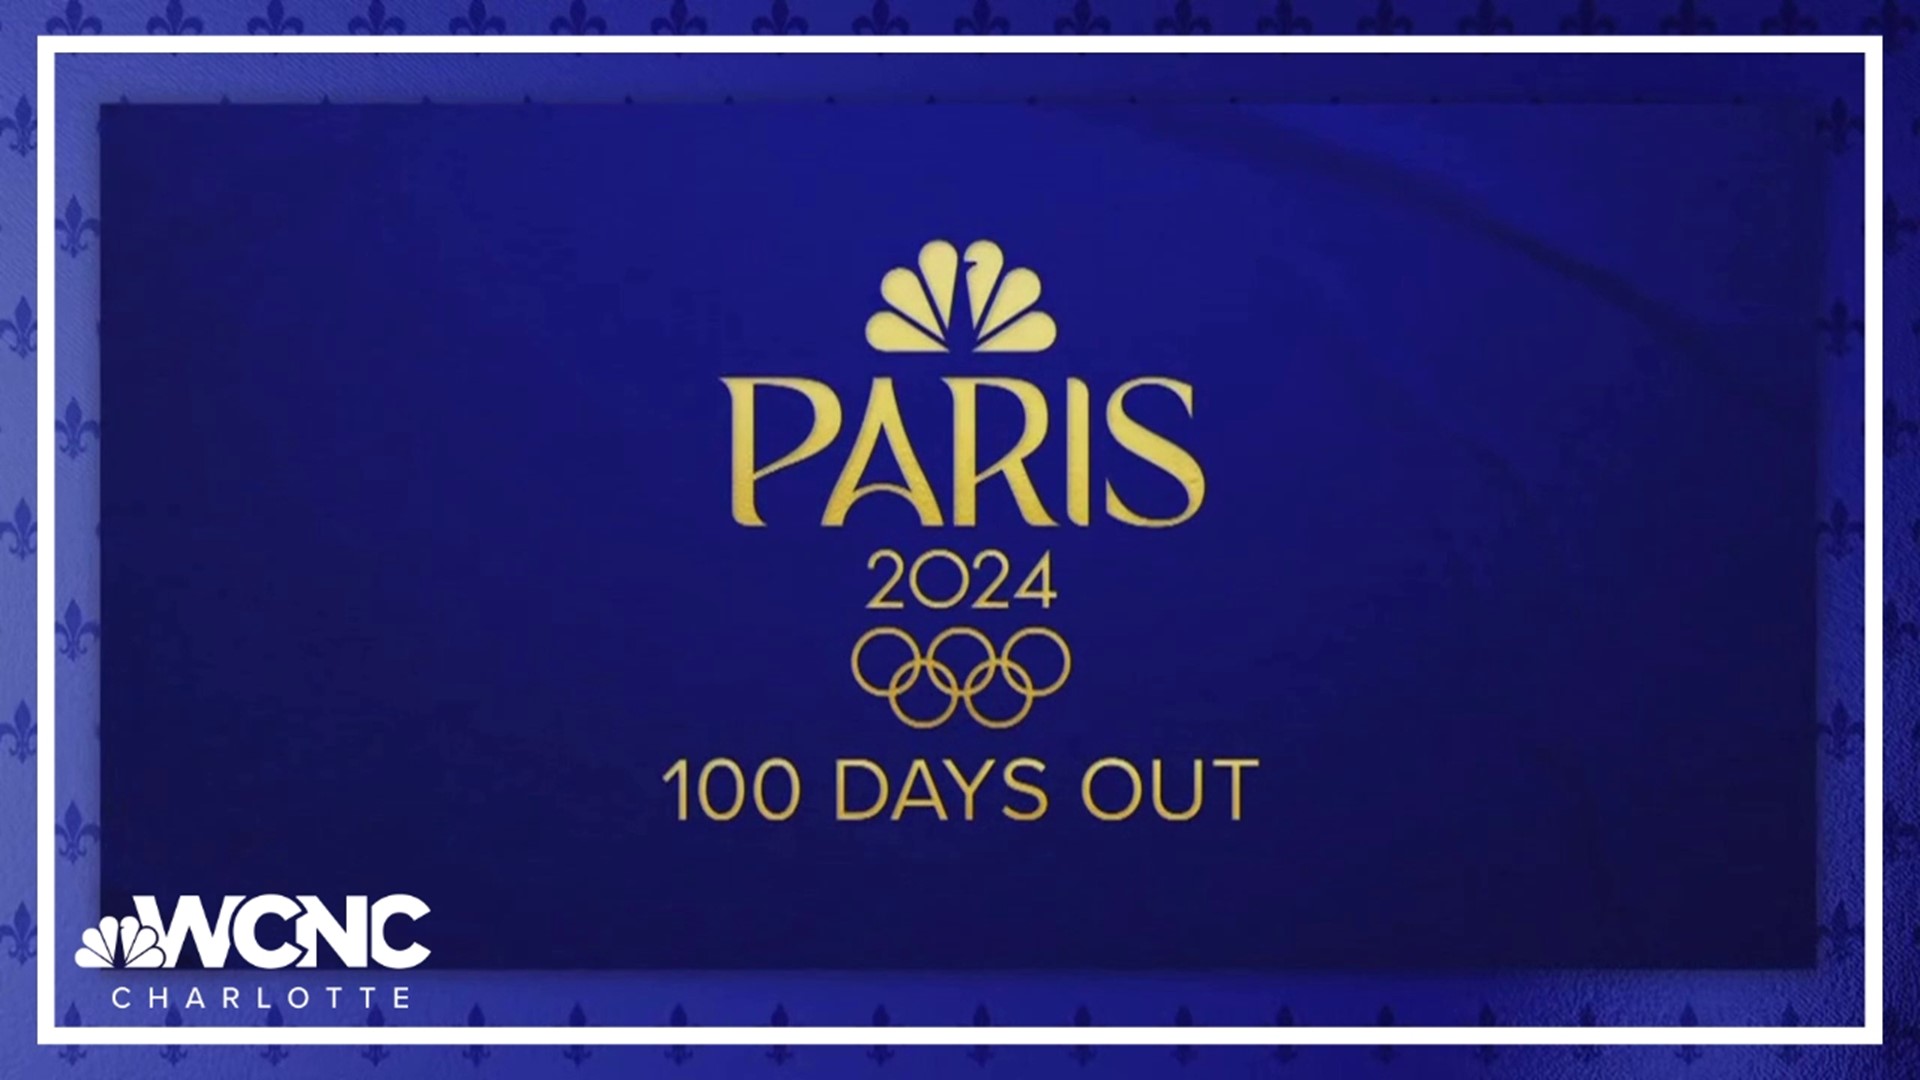 The countdown is on for the 2024 Summer Olympics! Our newsroom is celebrating as we prepare for the Paris Games.